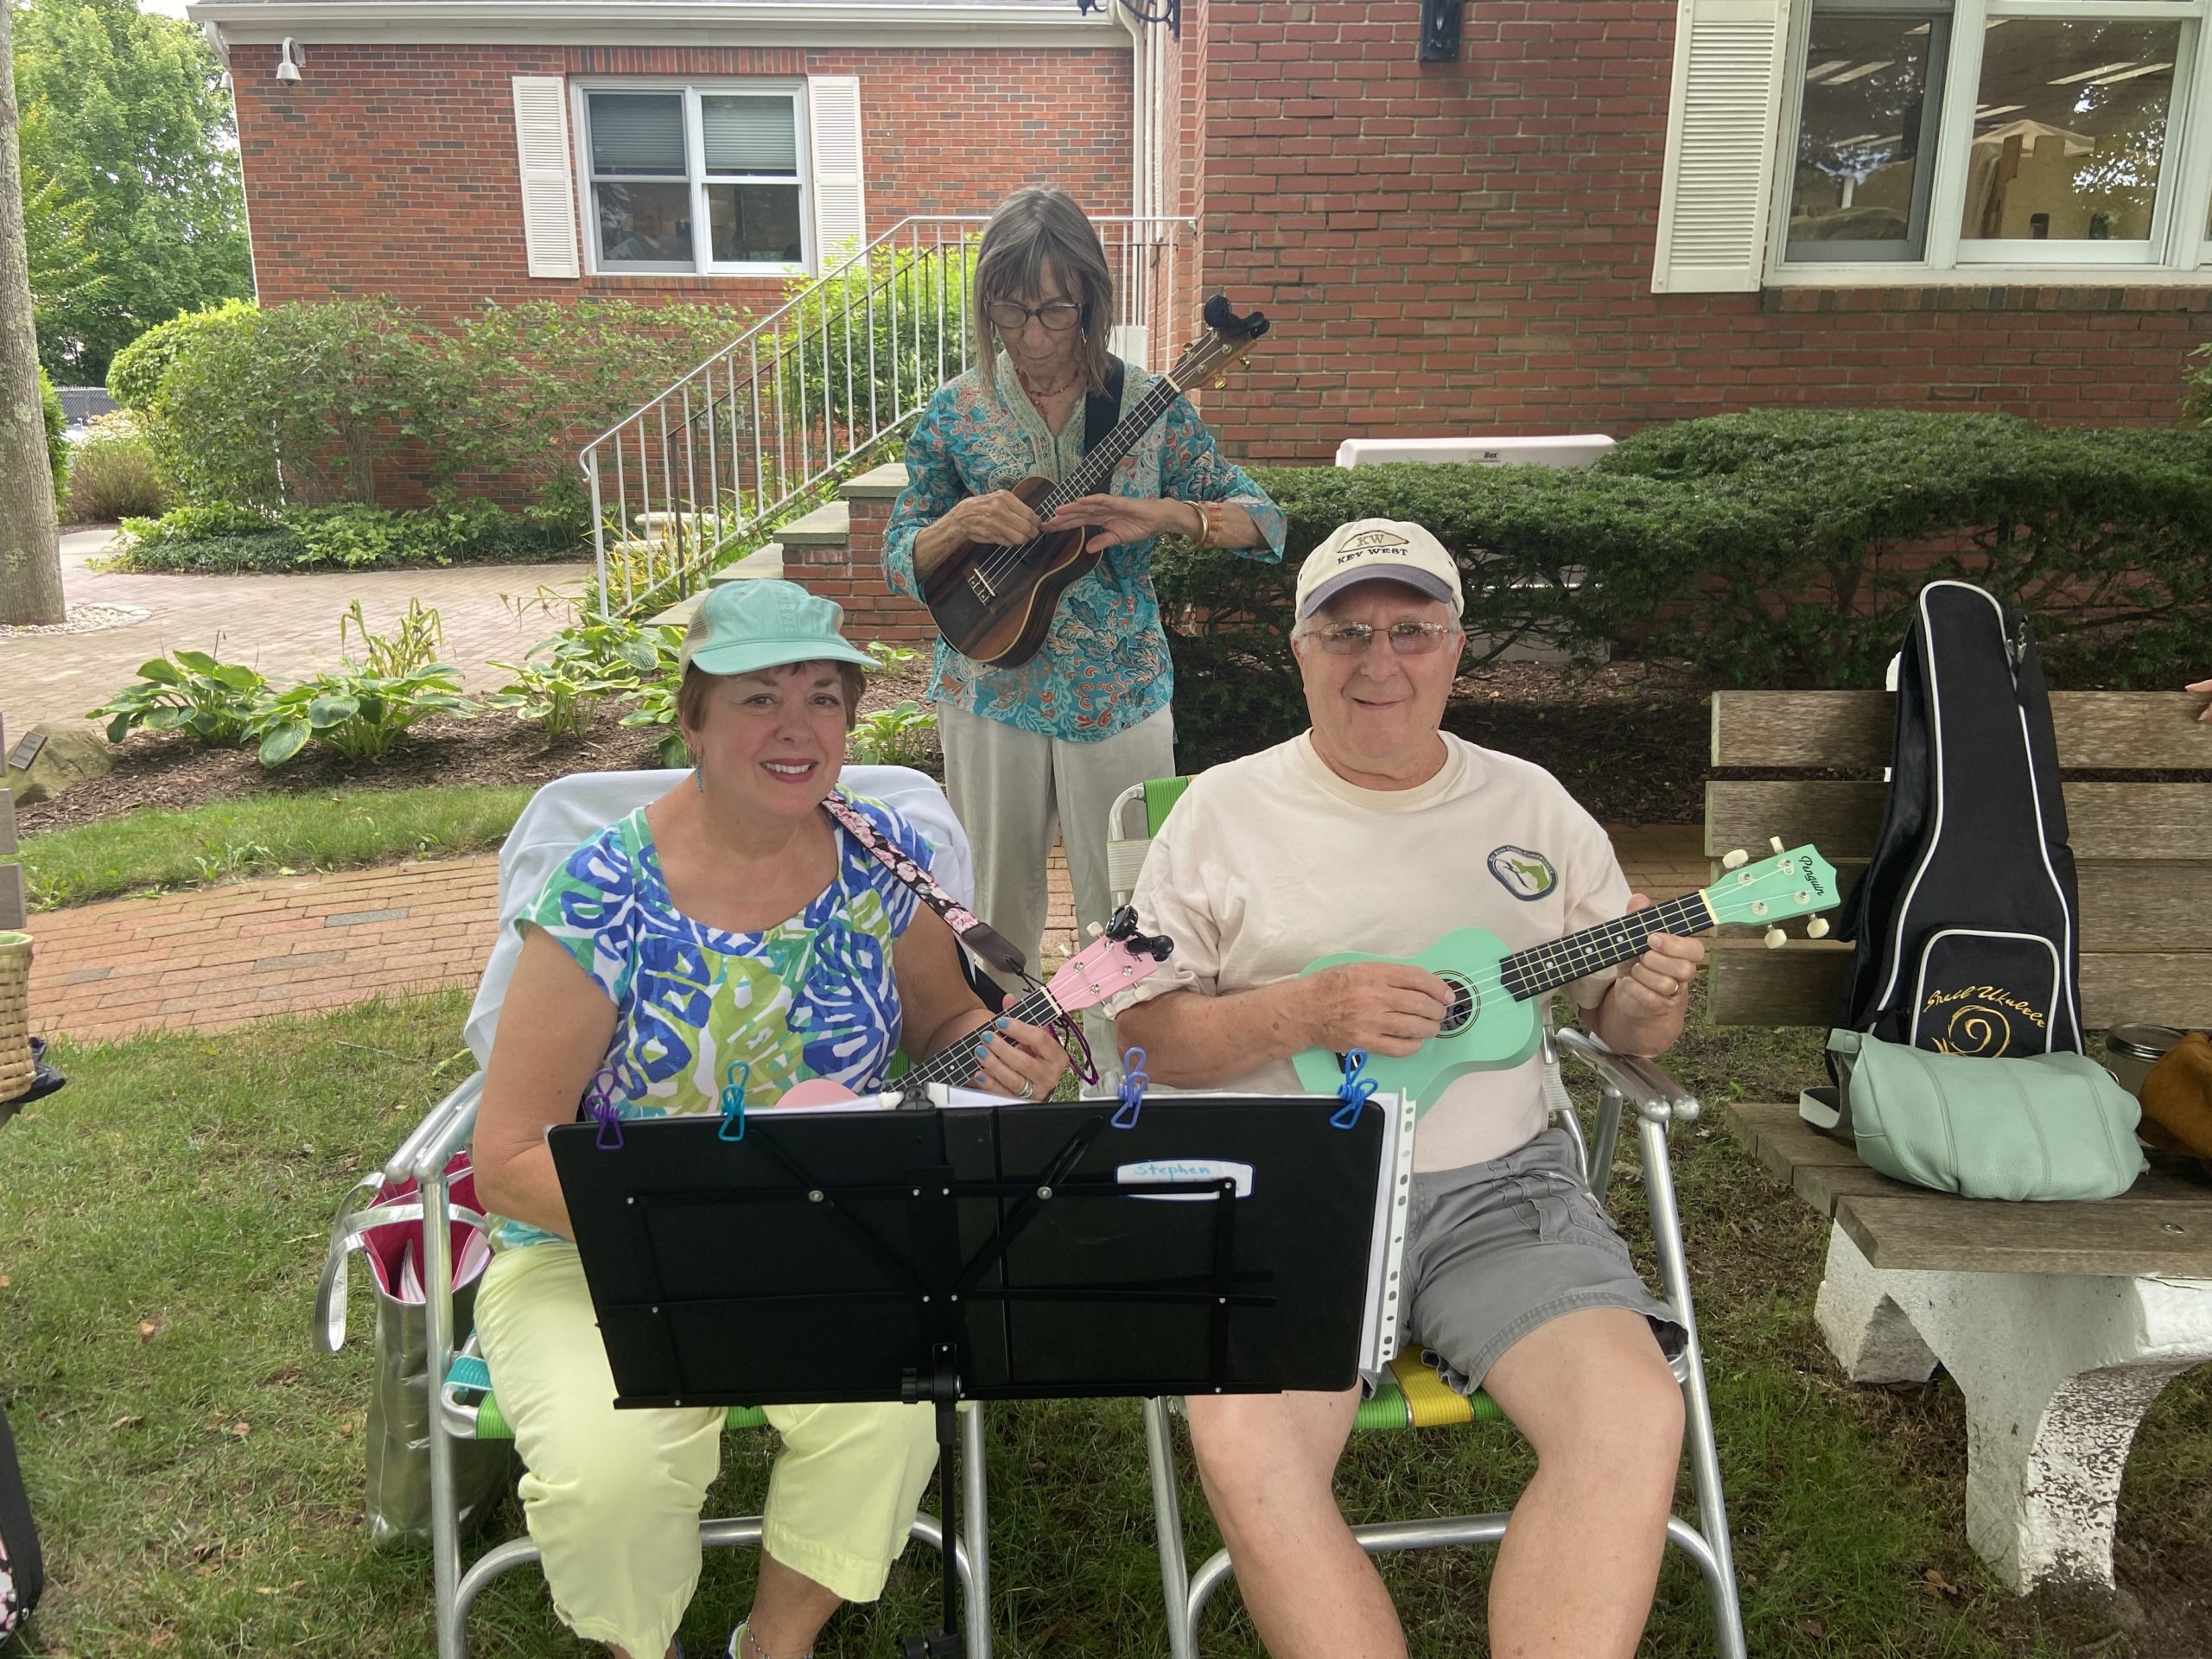 A husband and wife duo joins the Ukelele group to jam out on Monday.